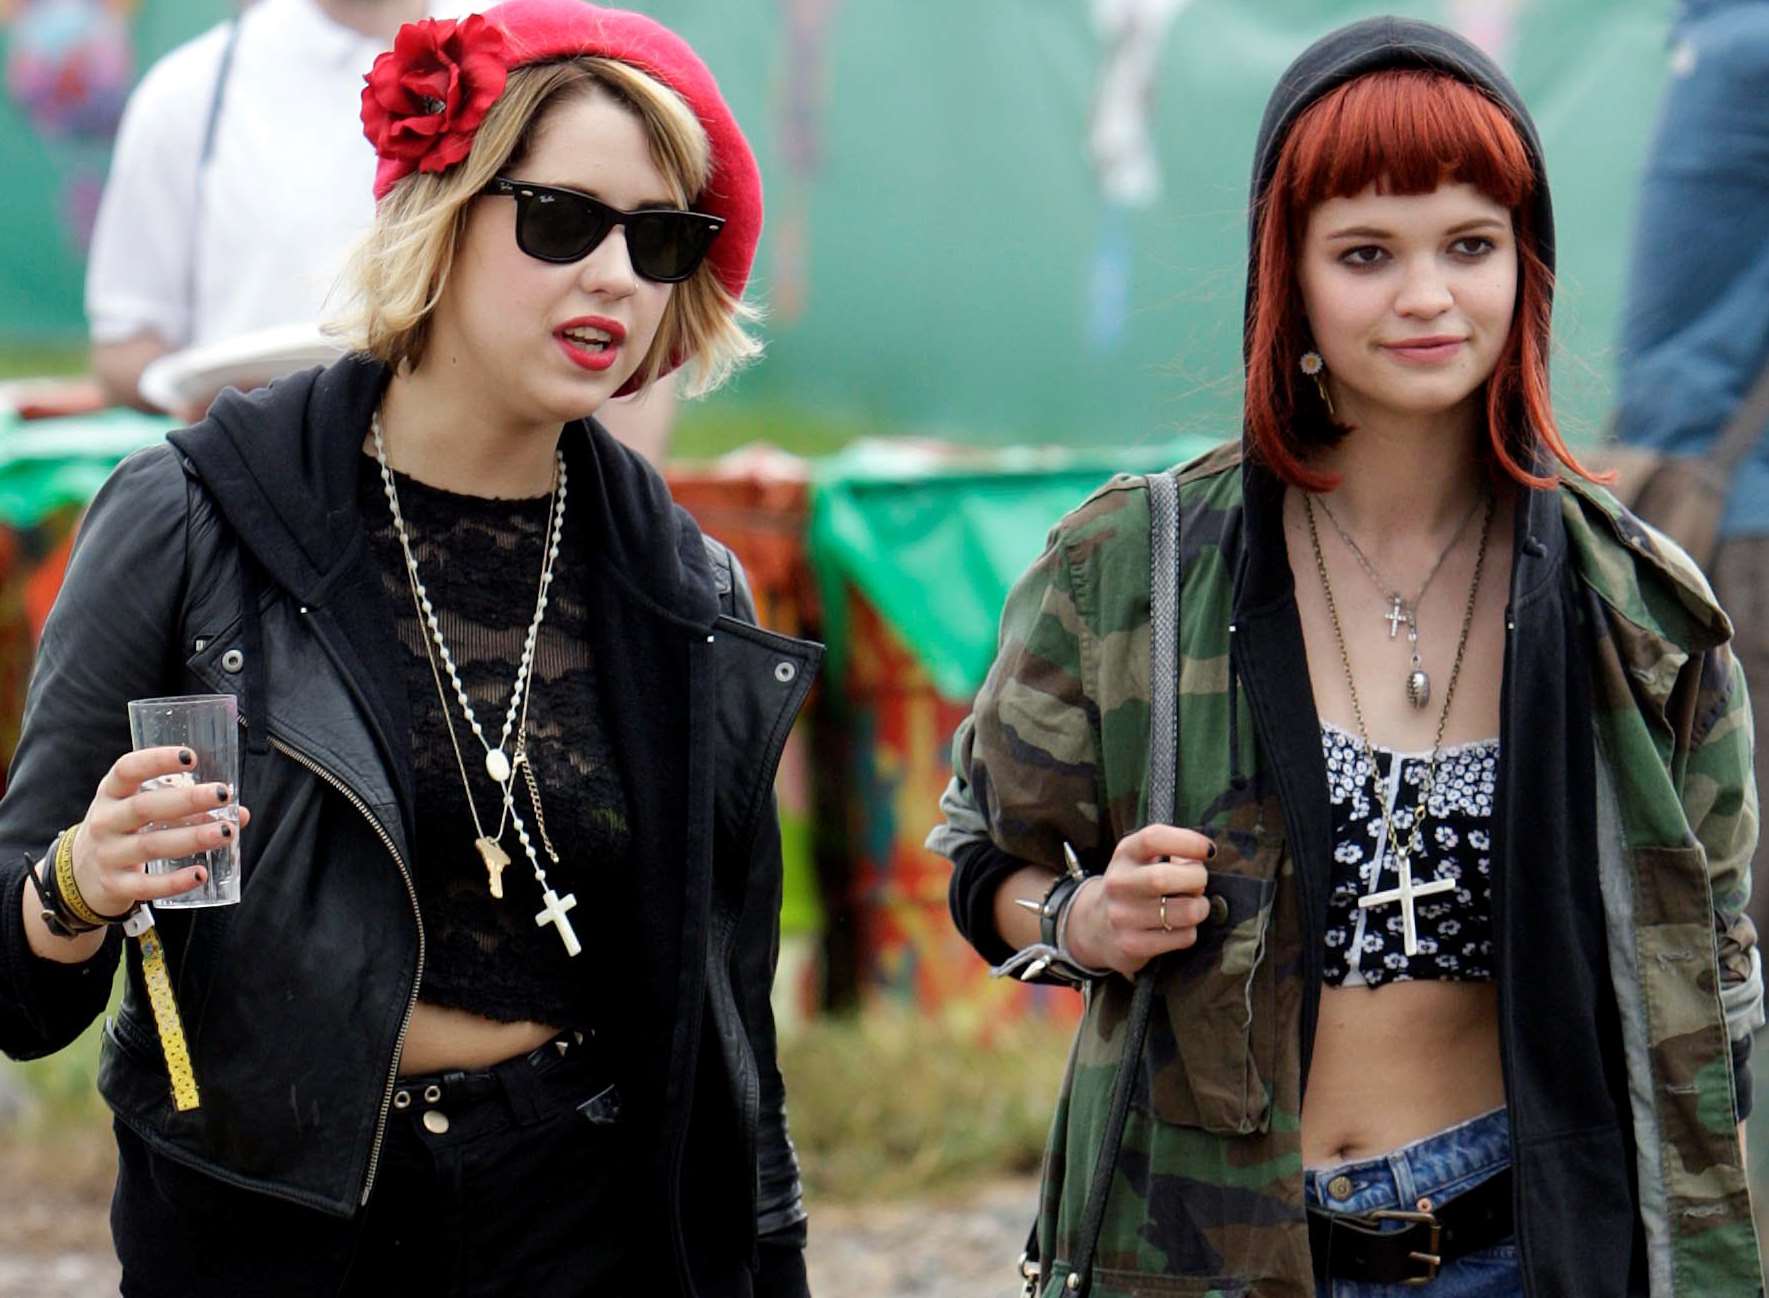 Peaches Geldof (left) with sister Pixie at Glastonbury Festival in 2009. Picture: Jonathan Brady/SWNS.com